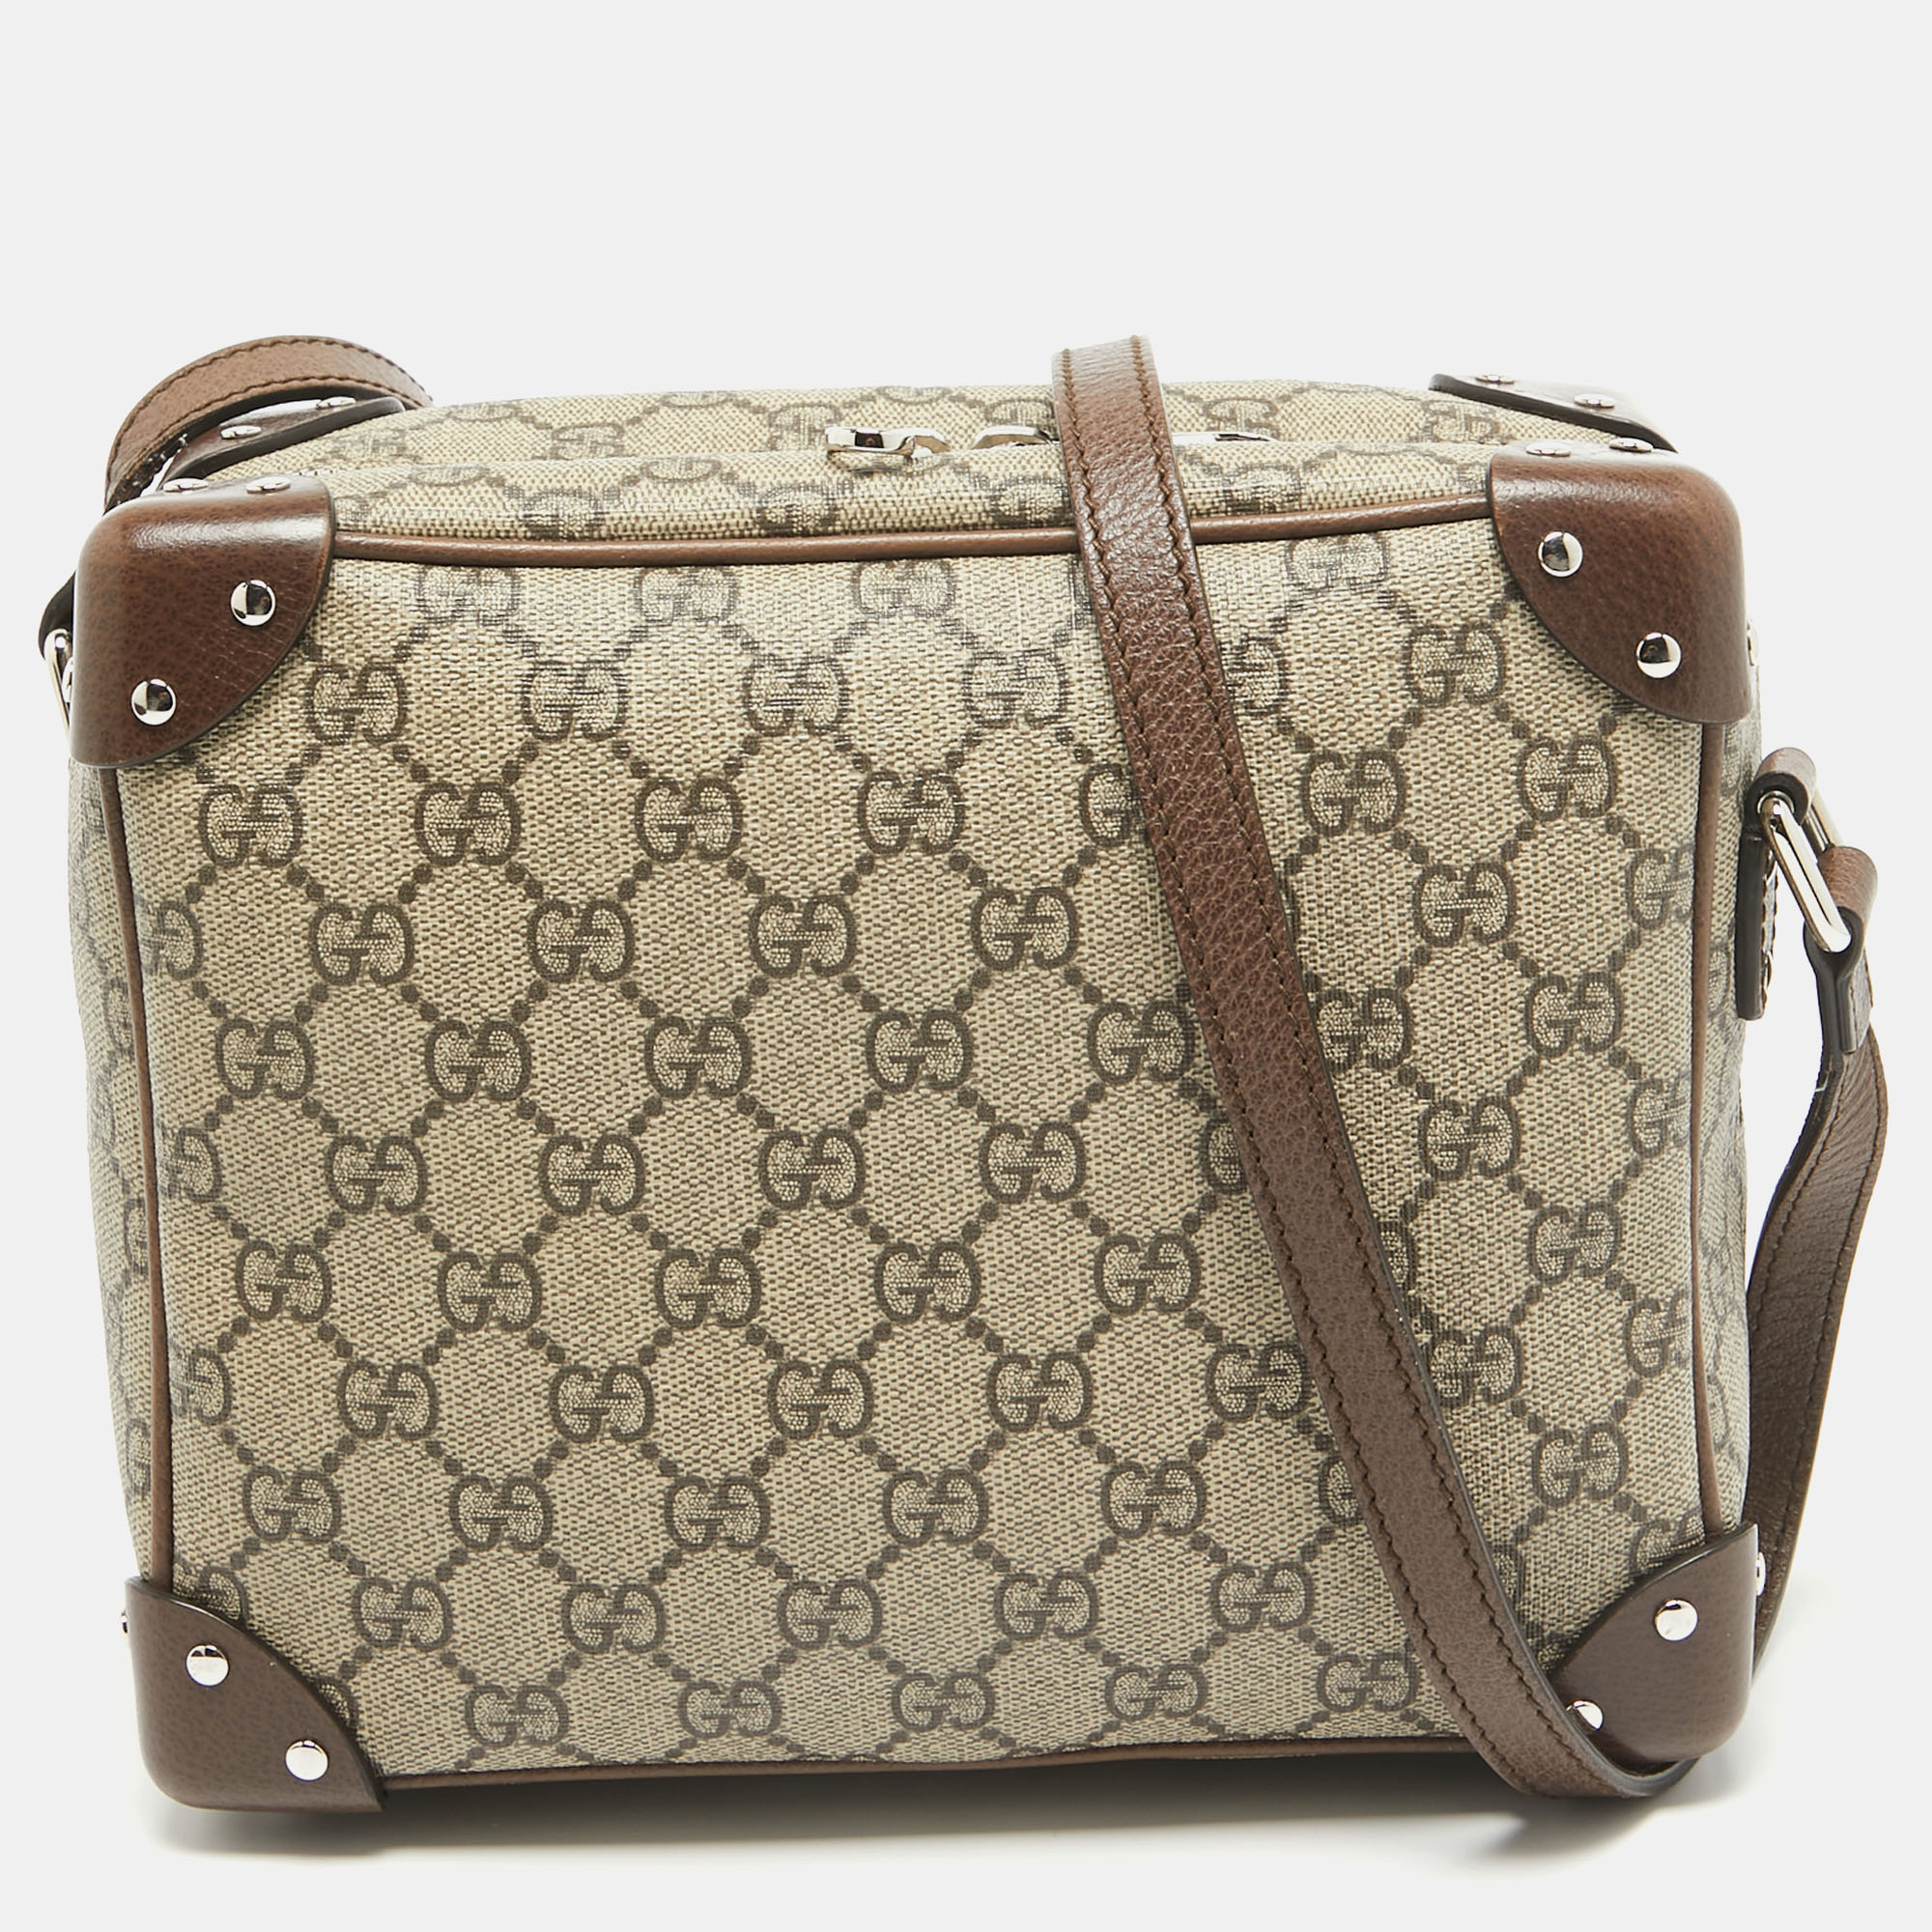 Pre-owned Gucci Brown/beige Gg Supreme Canvas Soft Trunk Crossbody Bag